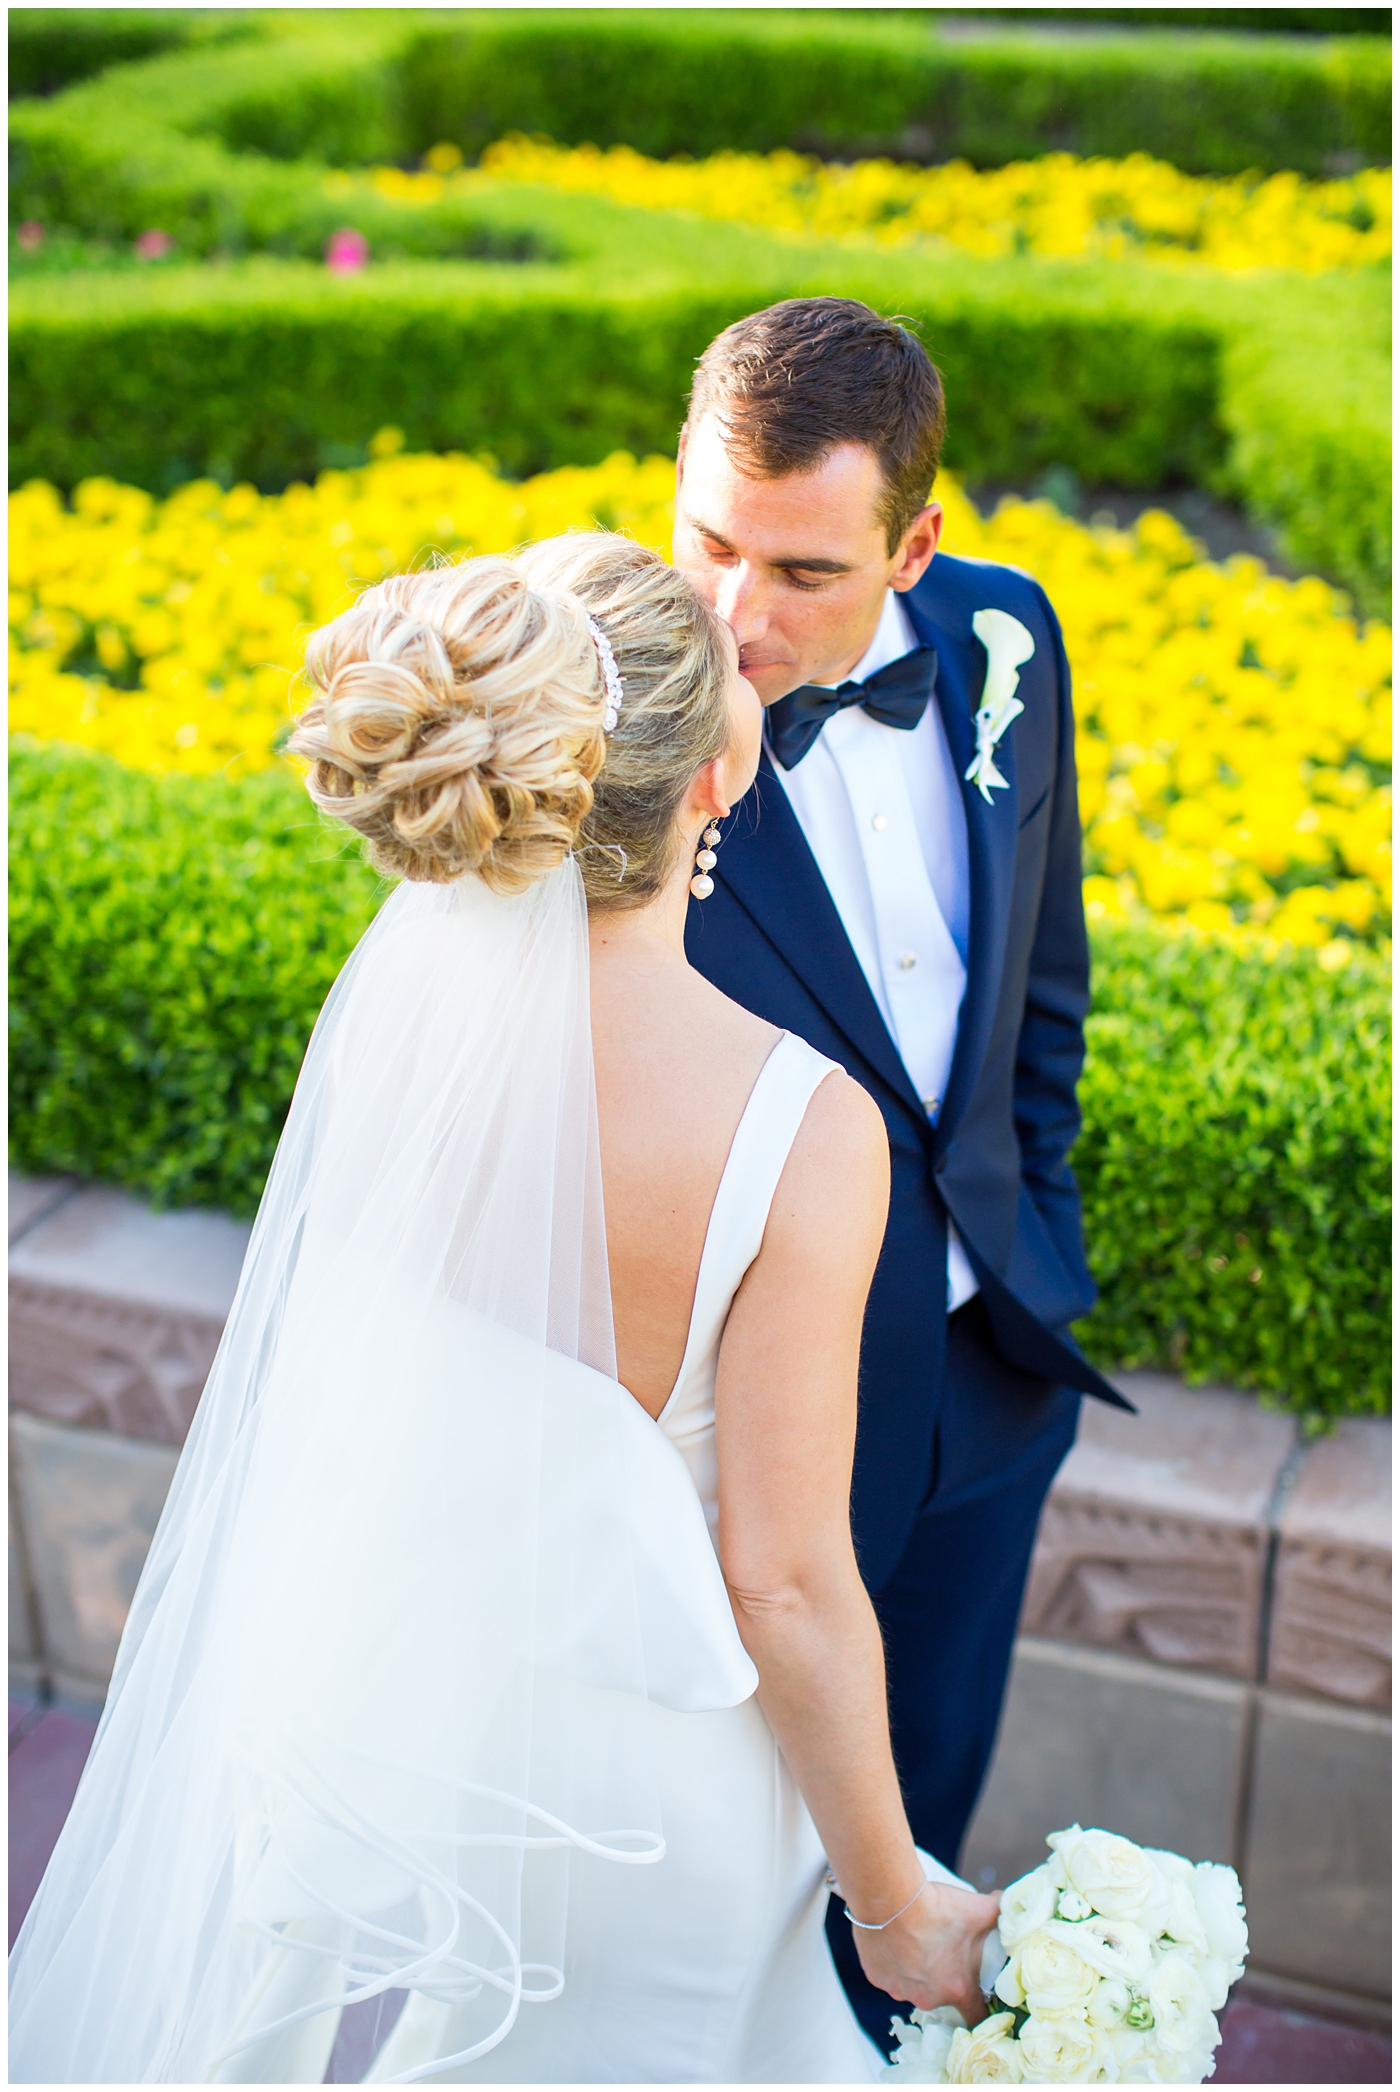 Bride in sareh nouri wedding dress with bow on the back and pink lip stick with all white flower bouquet with groom in navy neiman marcus and canali suit with bowtie with calla lilly boutonniere wedding day portrait